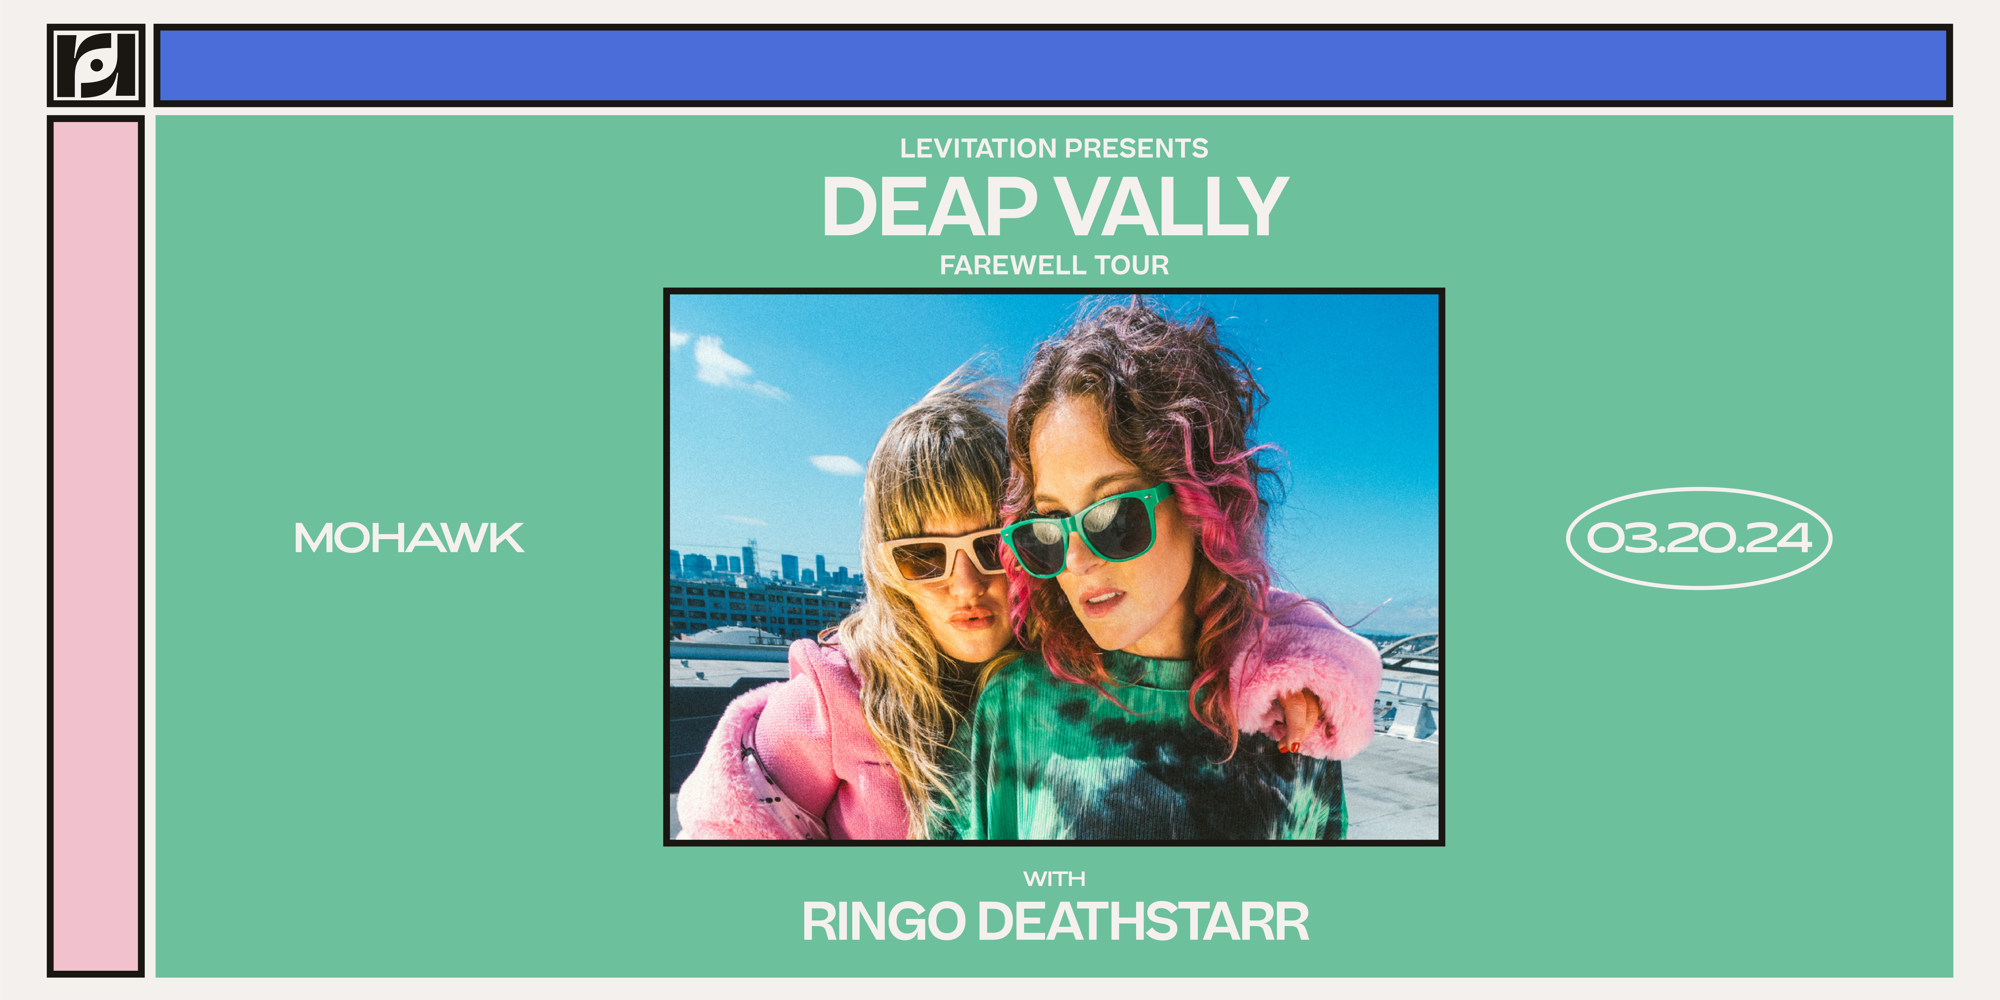 Levitation & Resound Present: Deap Vally - Farewell Tour w/ Ringo Deathstarr at Mohawk promotional image